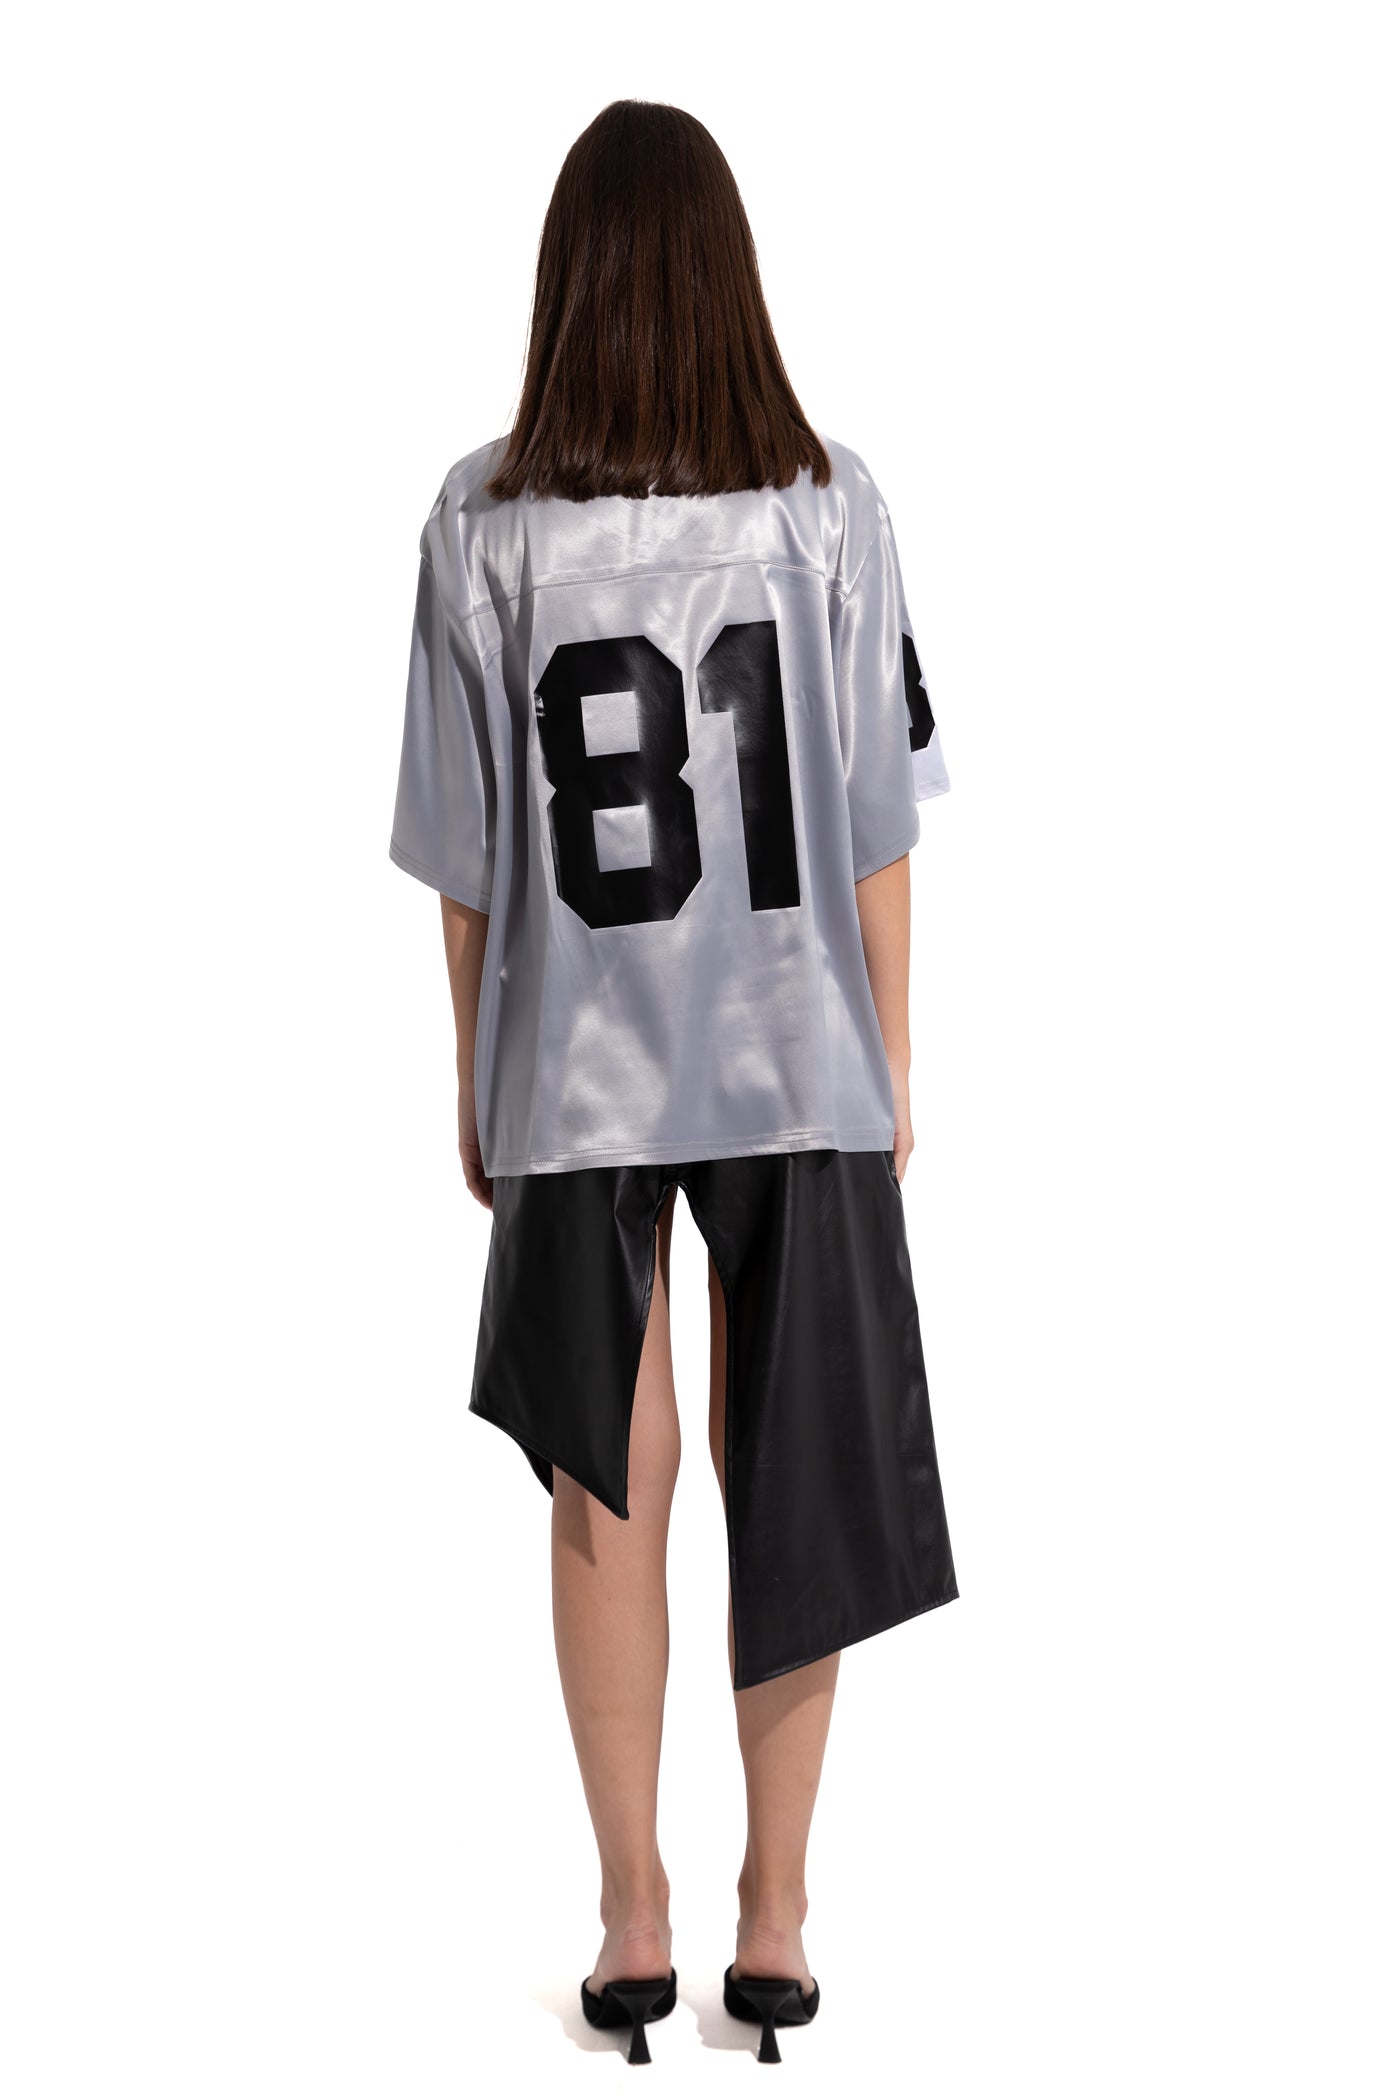 81 OVERSIZED T-SHIRT IN SILVER